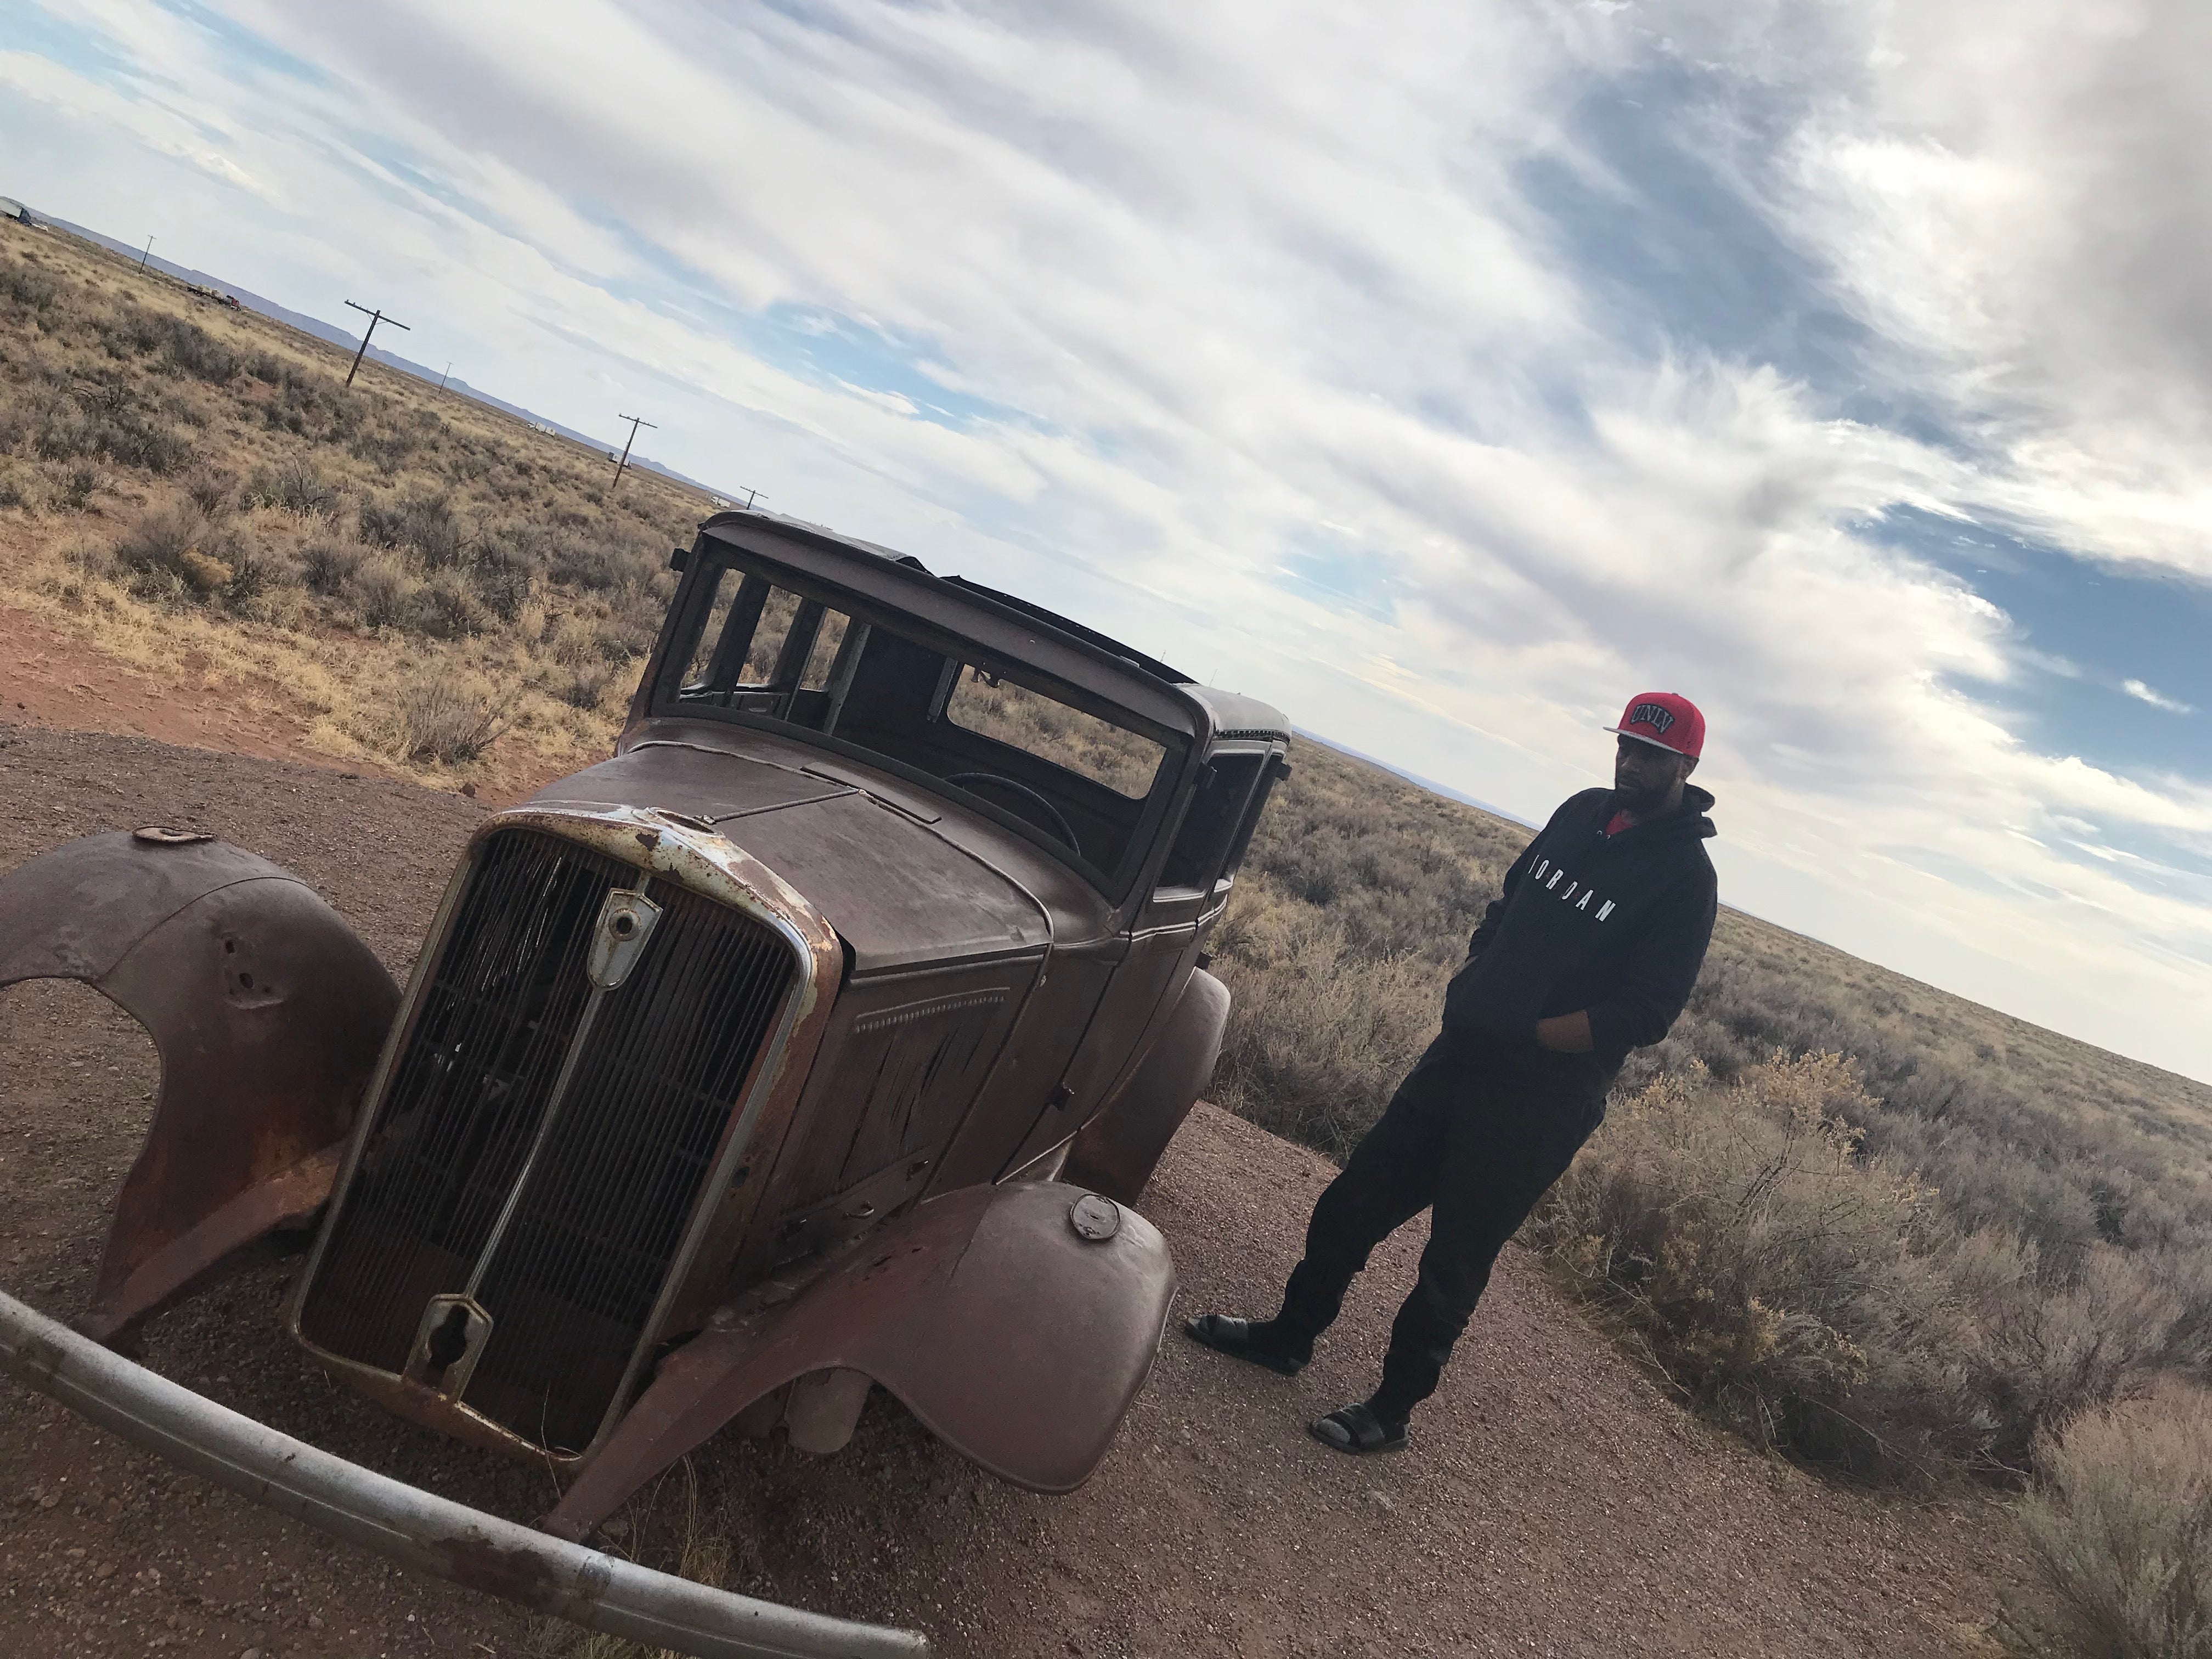 Did you know:   Route 66 runs right through the park and there is a monument in the park that pays tribute to the travelers along this iconic road, it isn't anything super exciting to look at but the history it shares is amazing!!